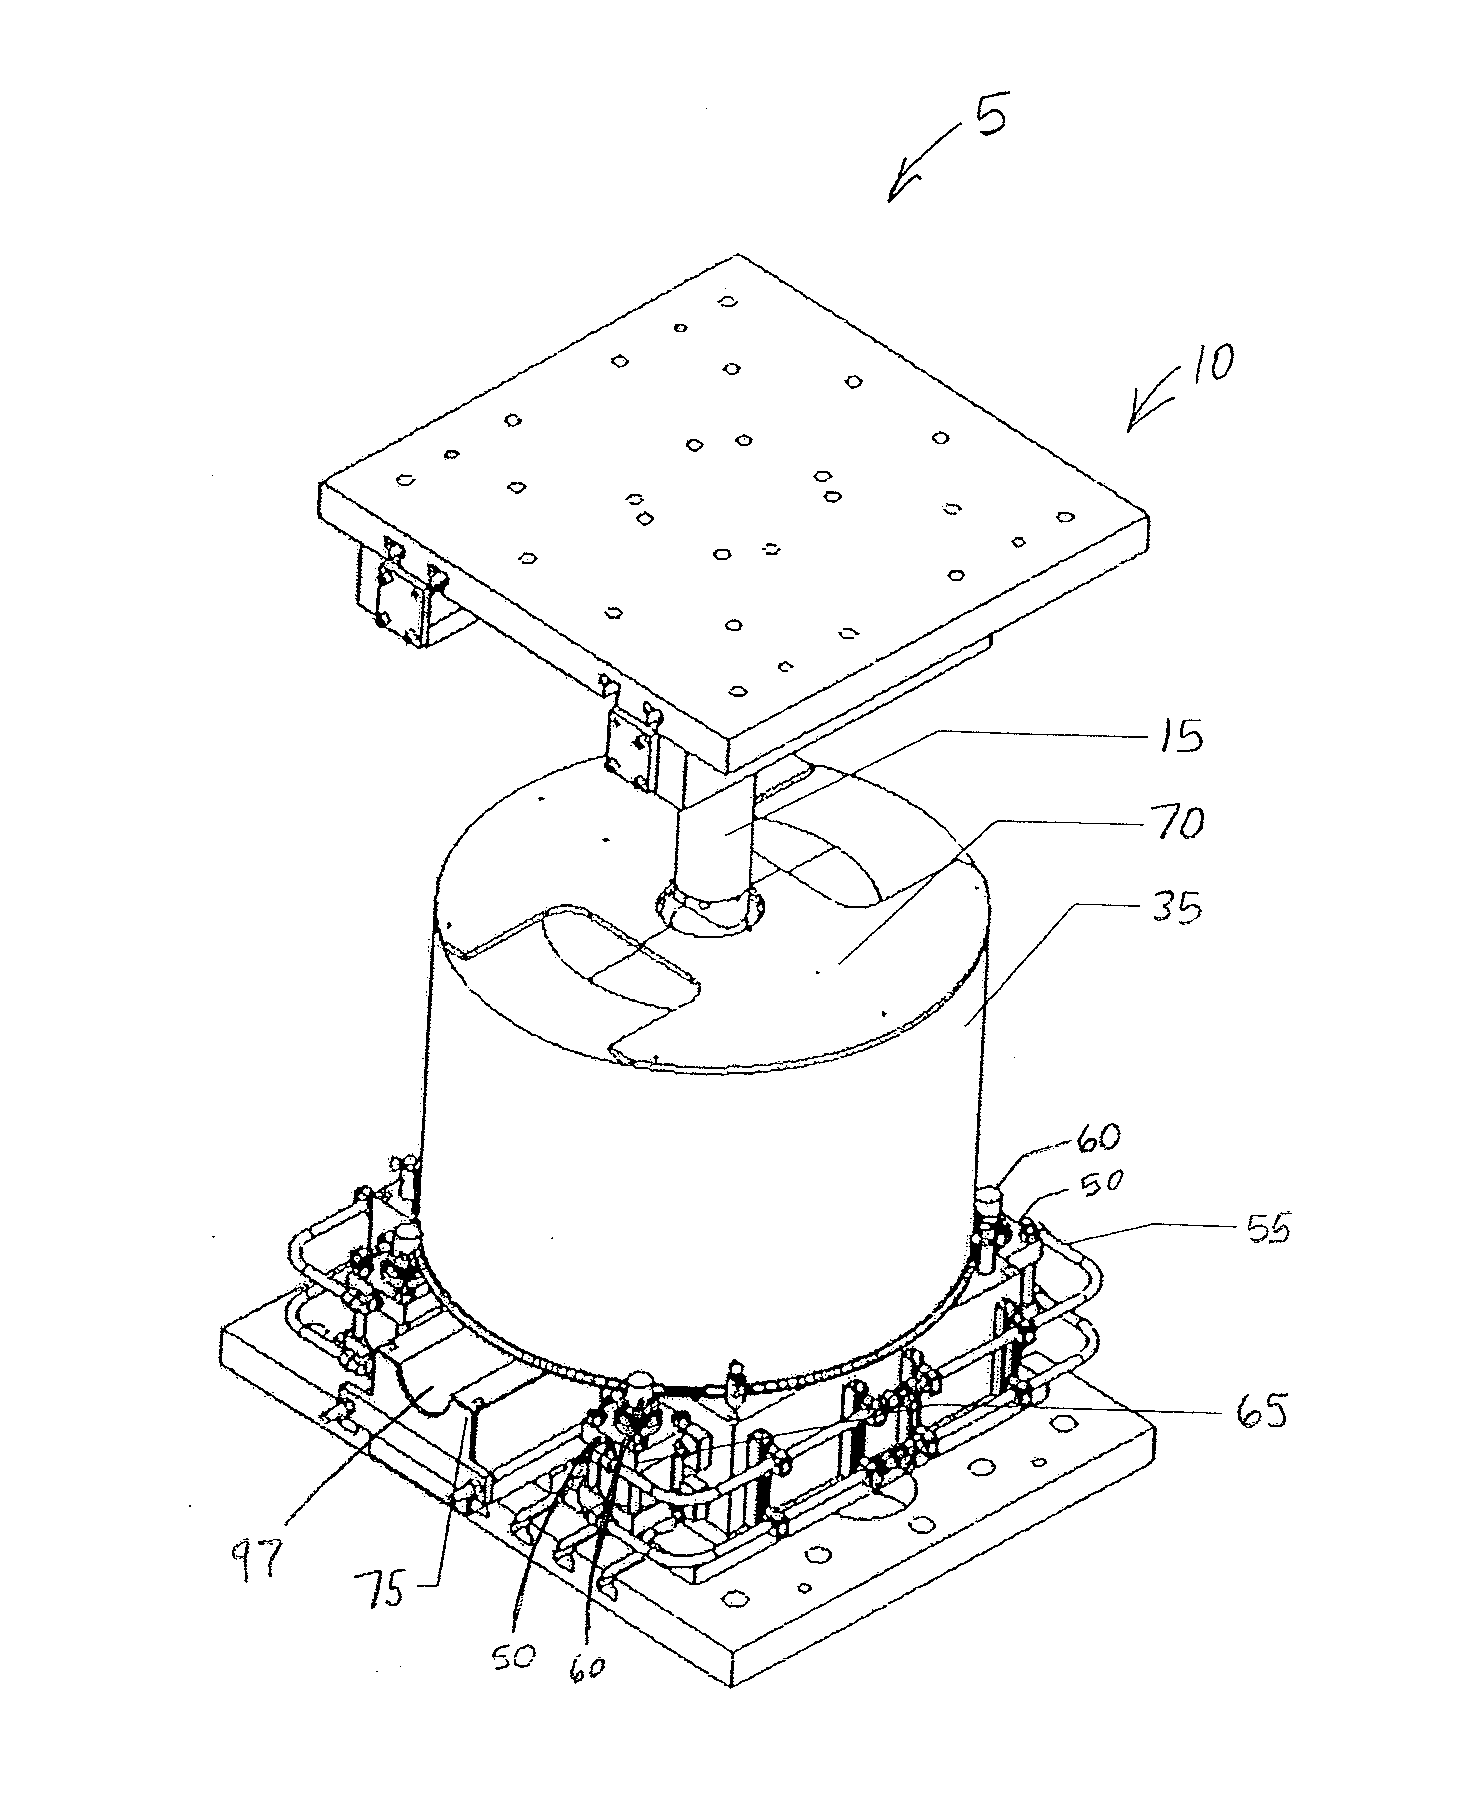 Apparatus for Deformation of Solid Sections